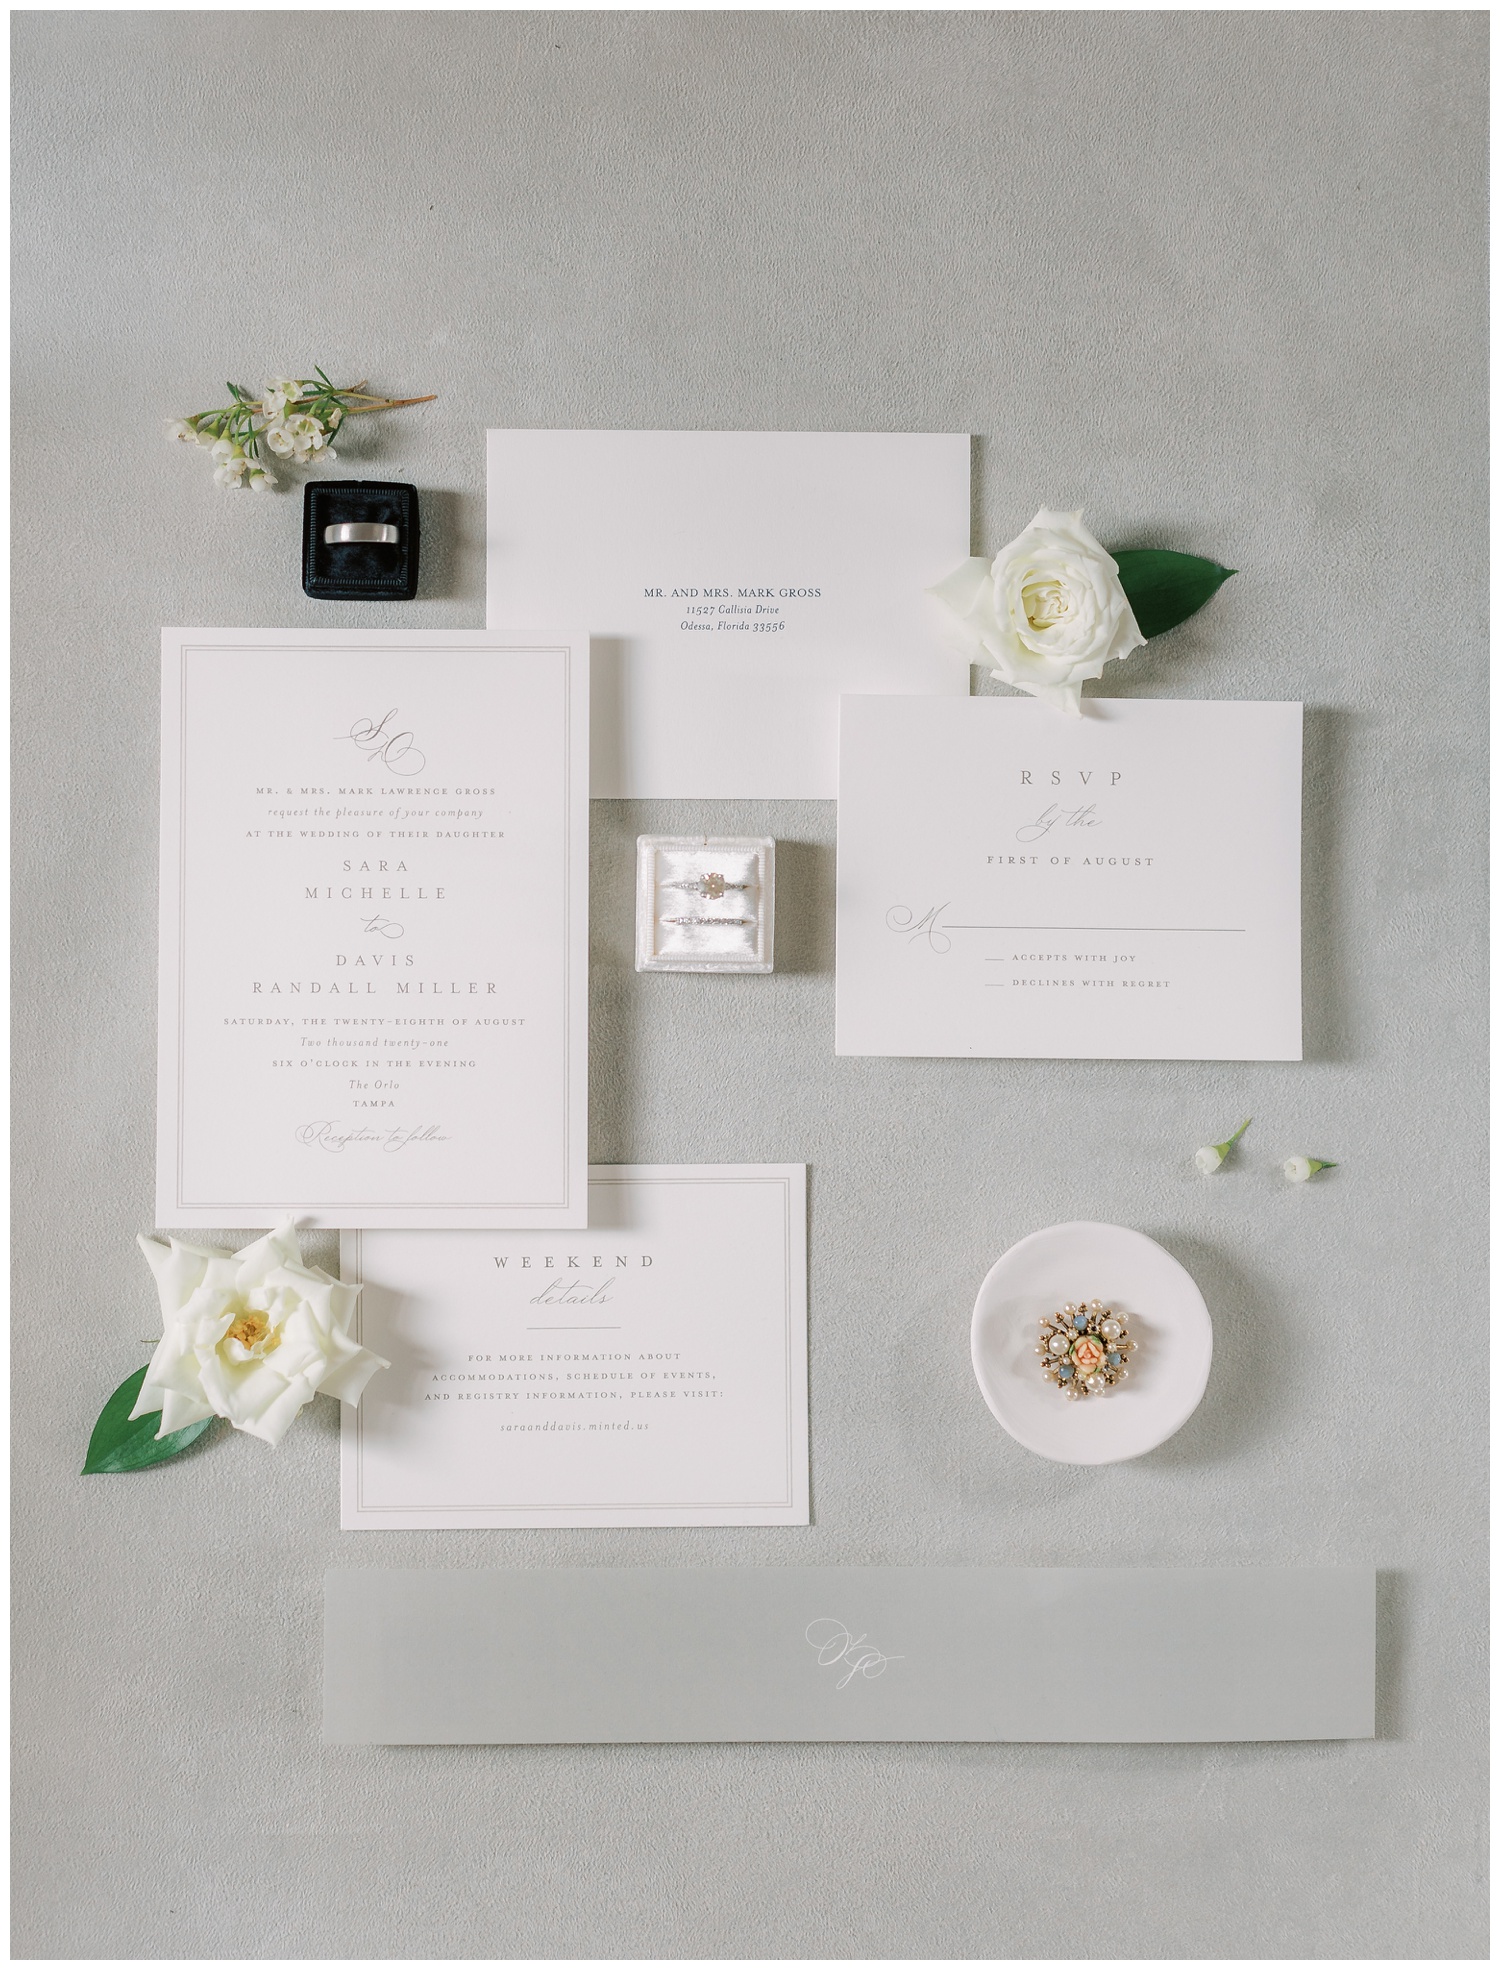 White and Gray invitation suite from Minted